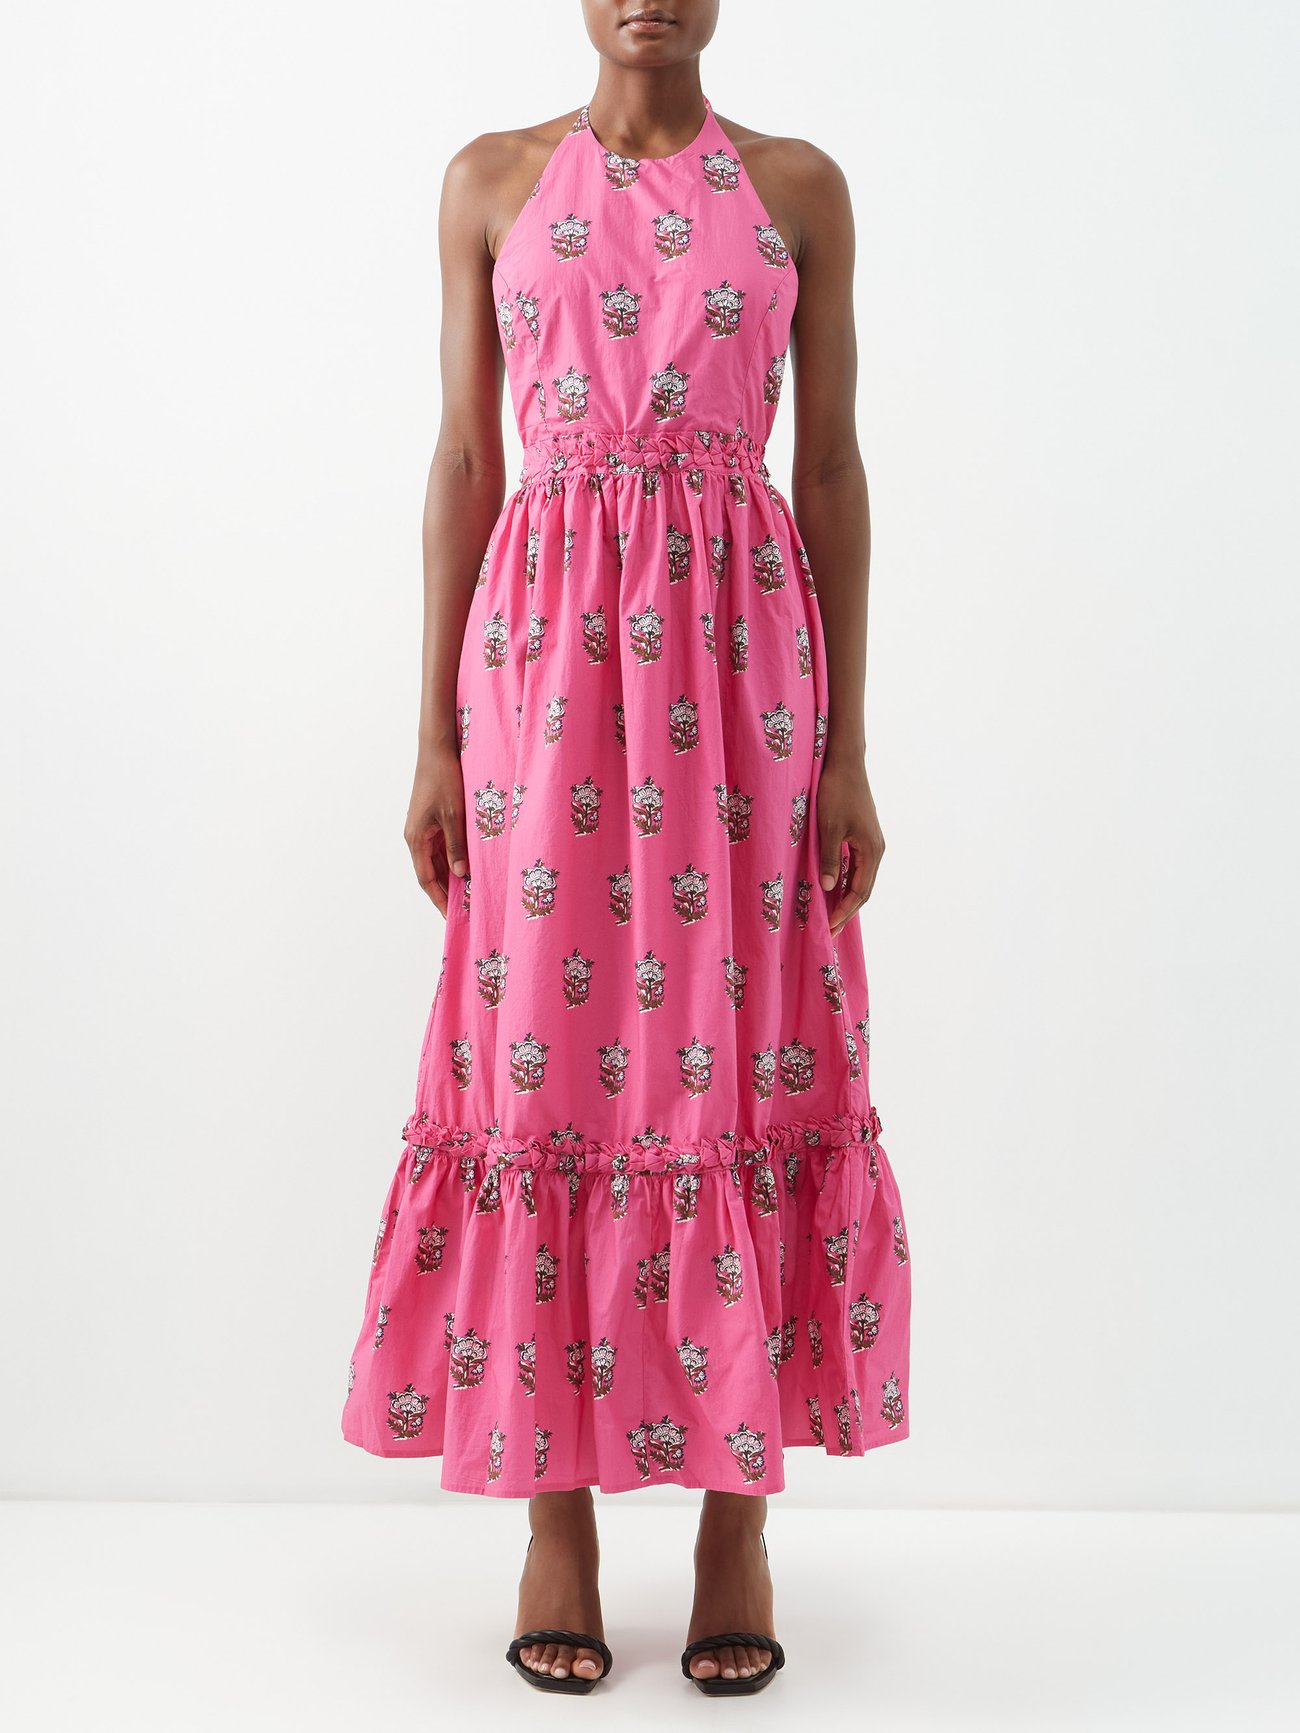 RHODE’s spirited charm echoes throughout this pink Salena halterneck dress with cinched waist. Made from printed cotton with a low back and loose maxi skirt with frill hem detail.